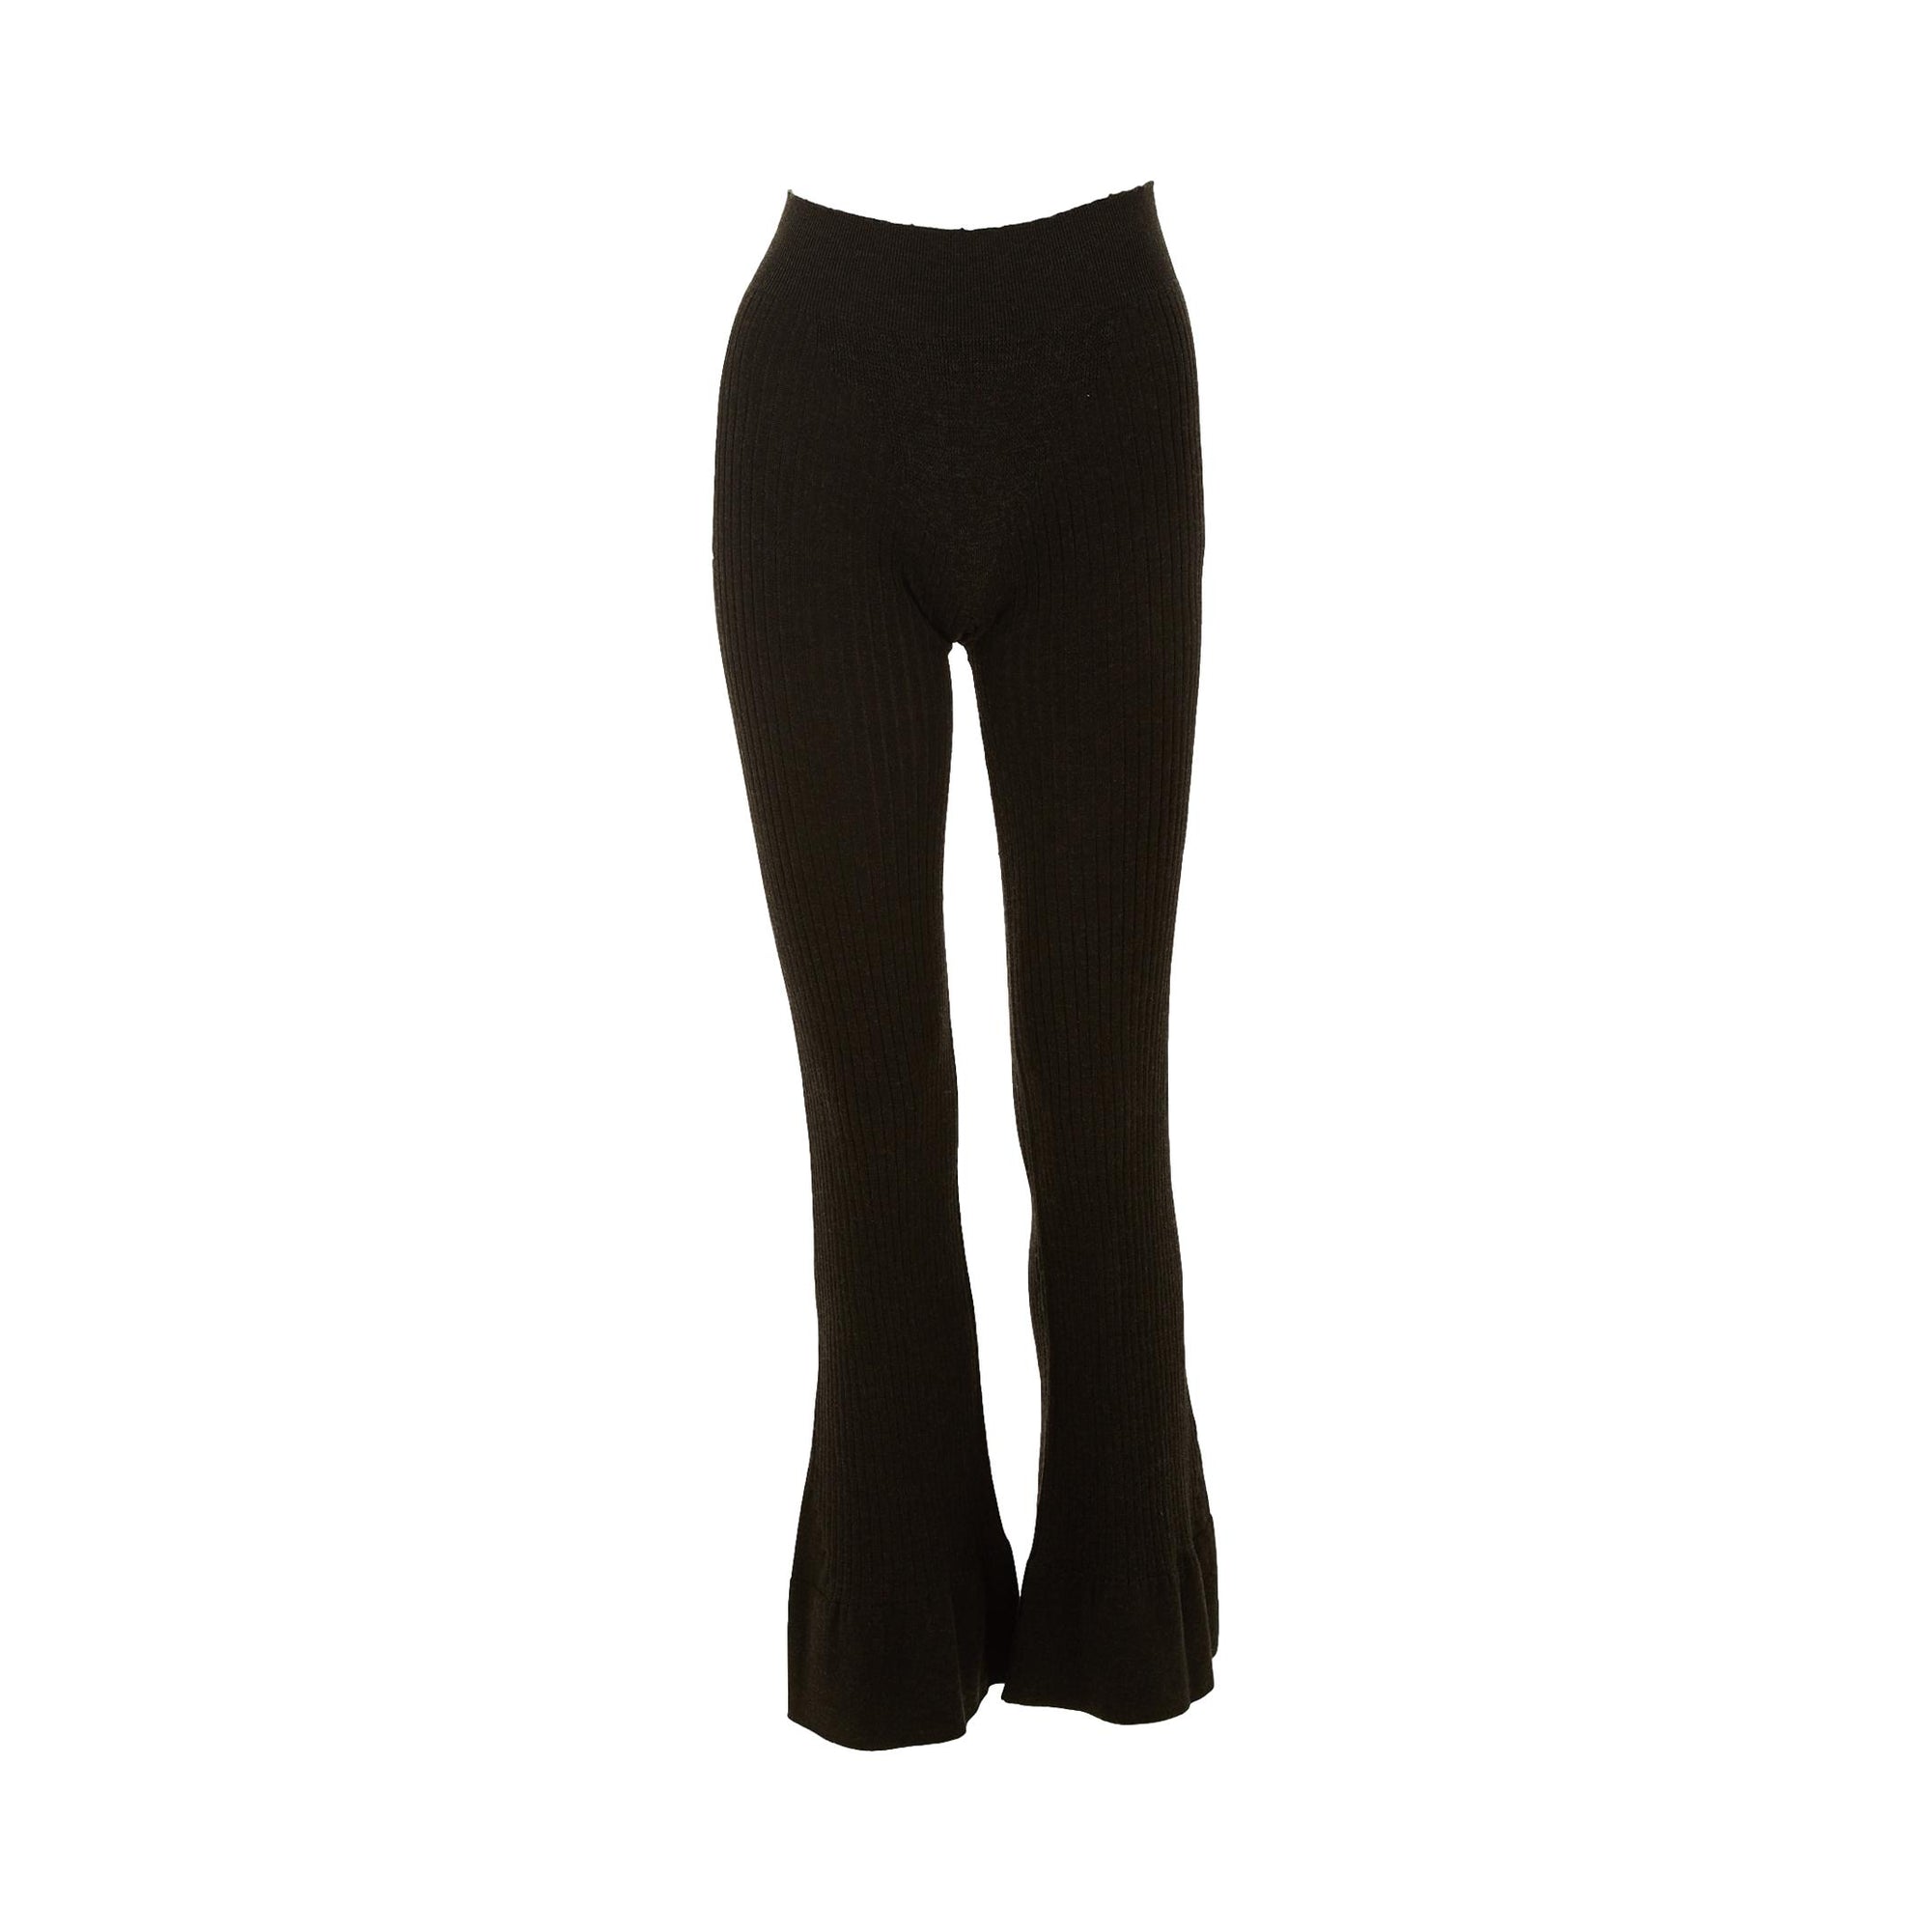 Jean Paul Gaultier Charcoal Ribbed Pants